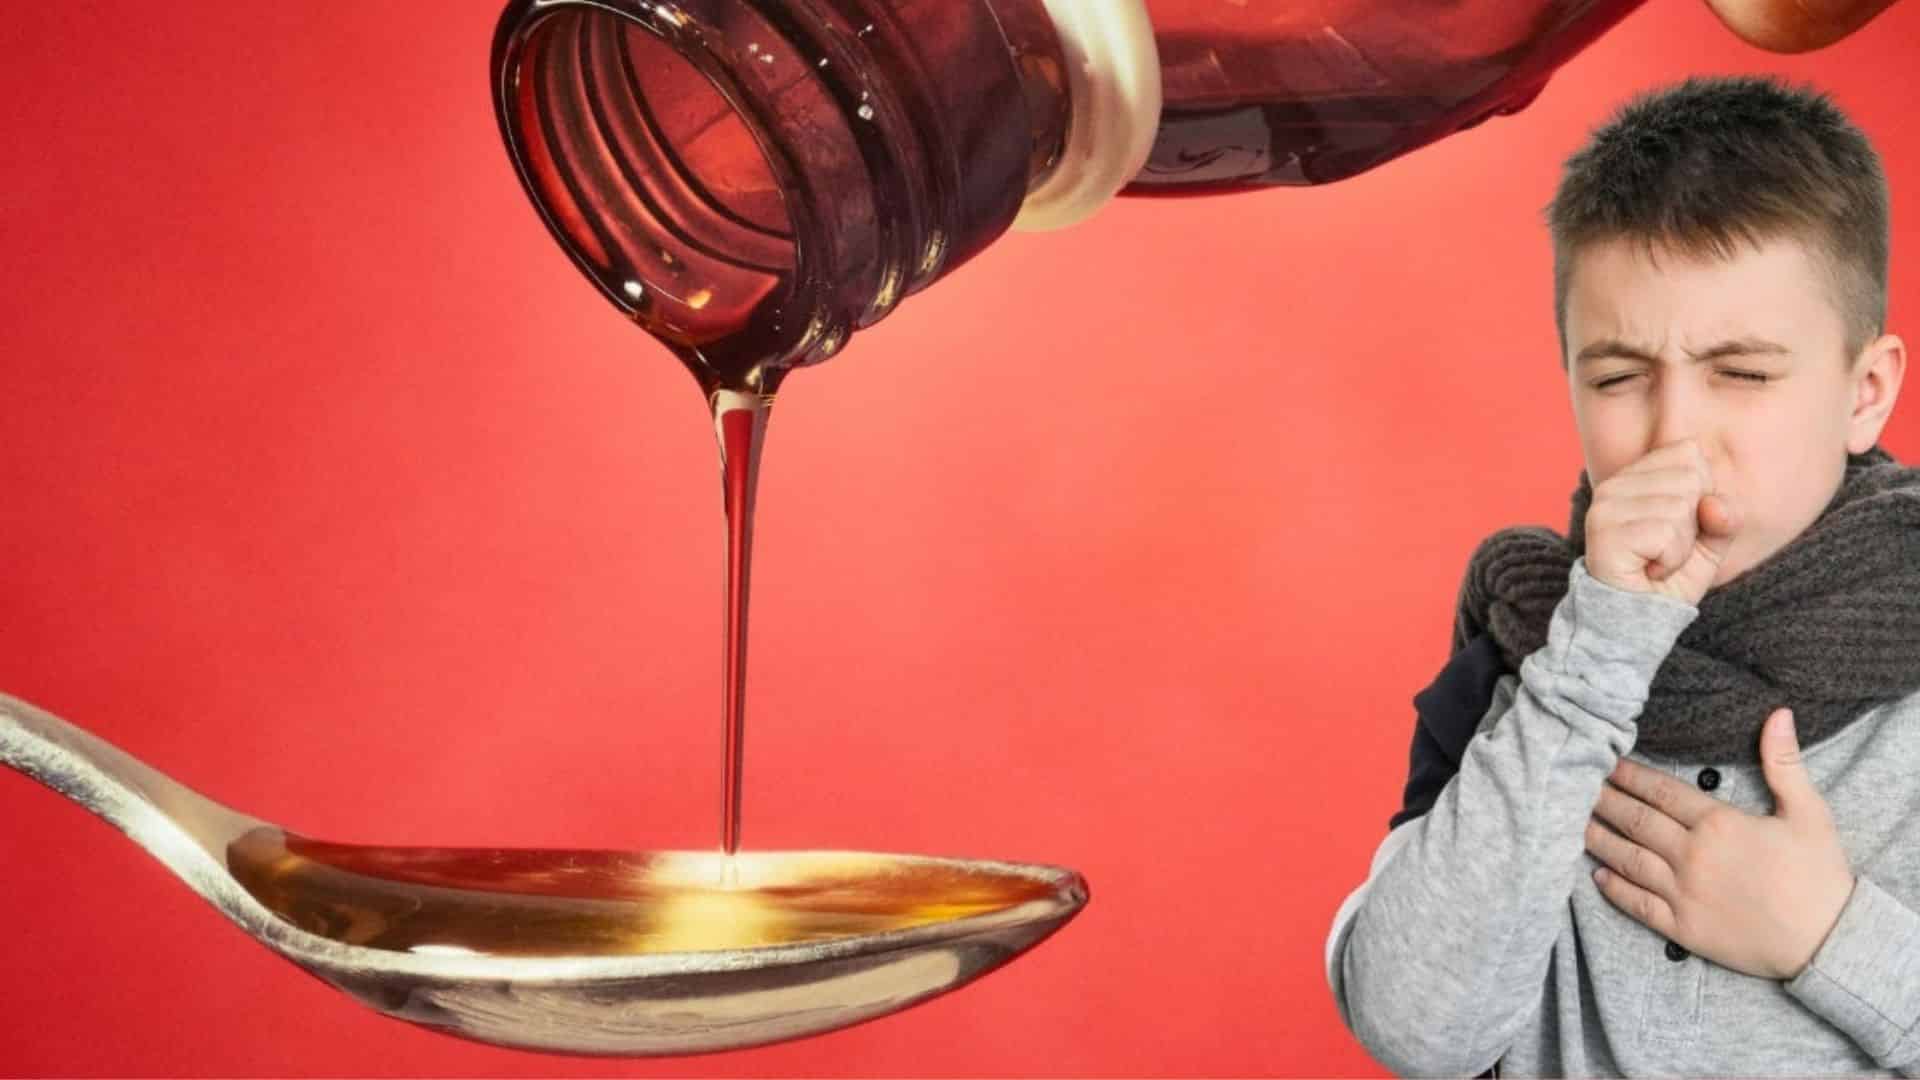 After Gambia, 18 Children Lost Their Lives In Uzbekistan After Consuming India-Made Syrup